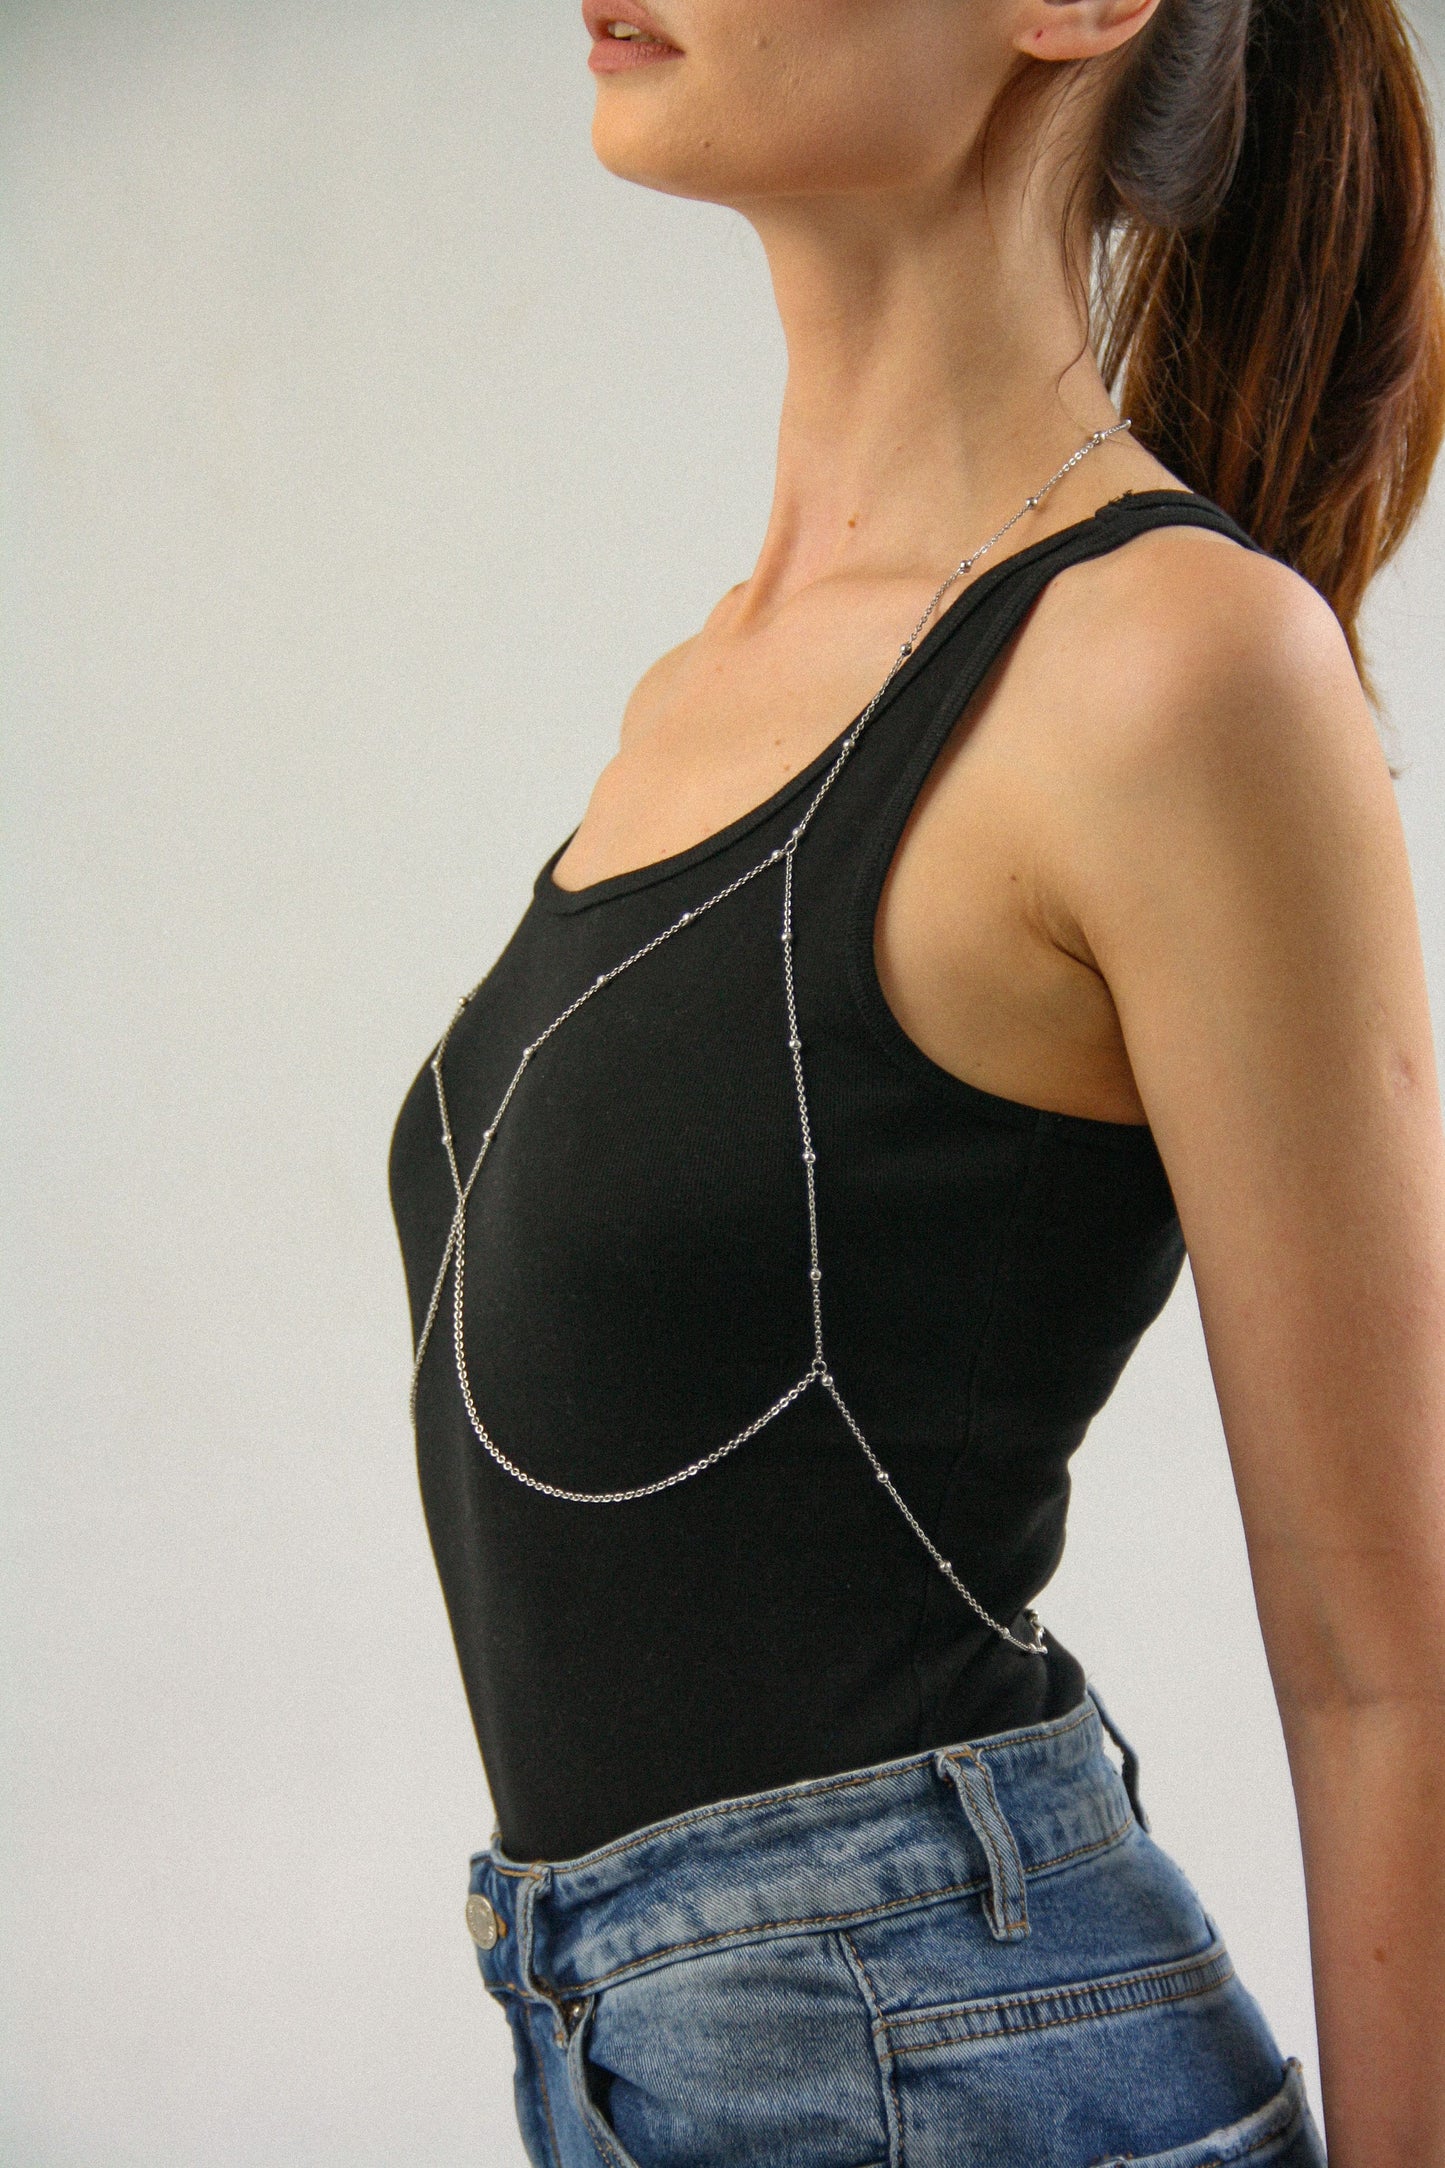 Stainless Steel Body Chain Necklace